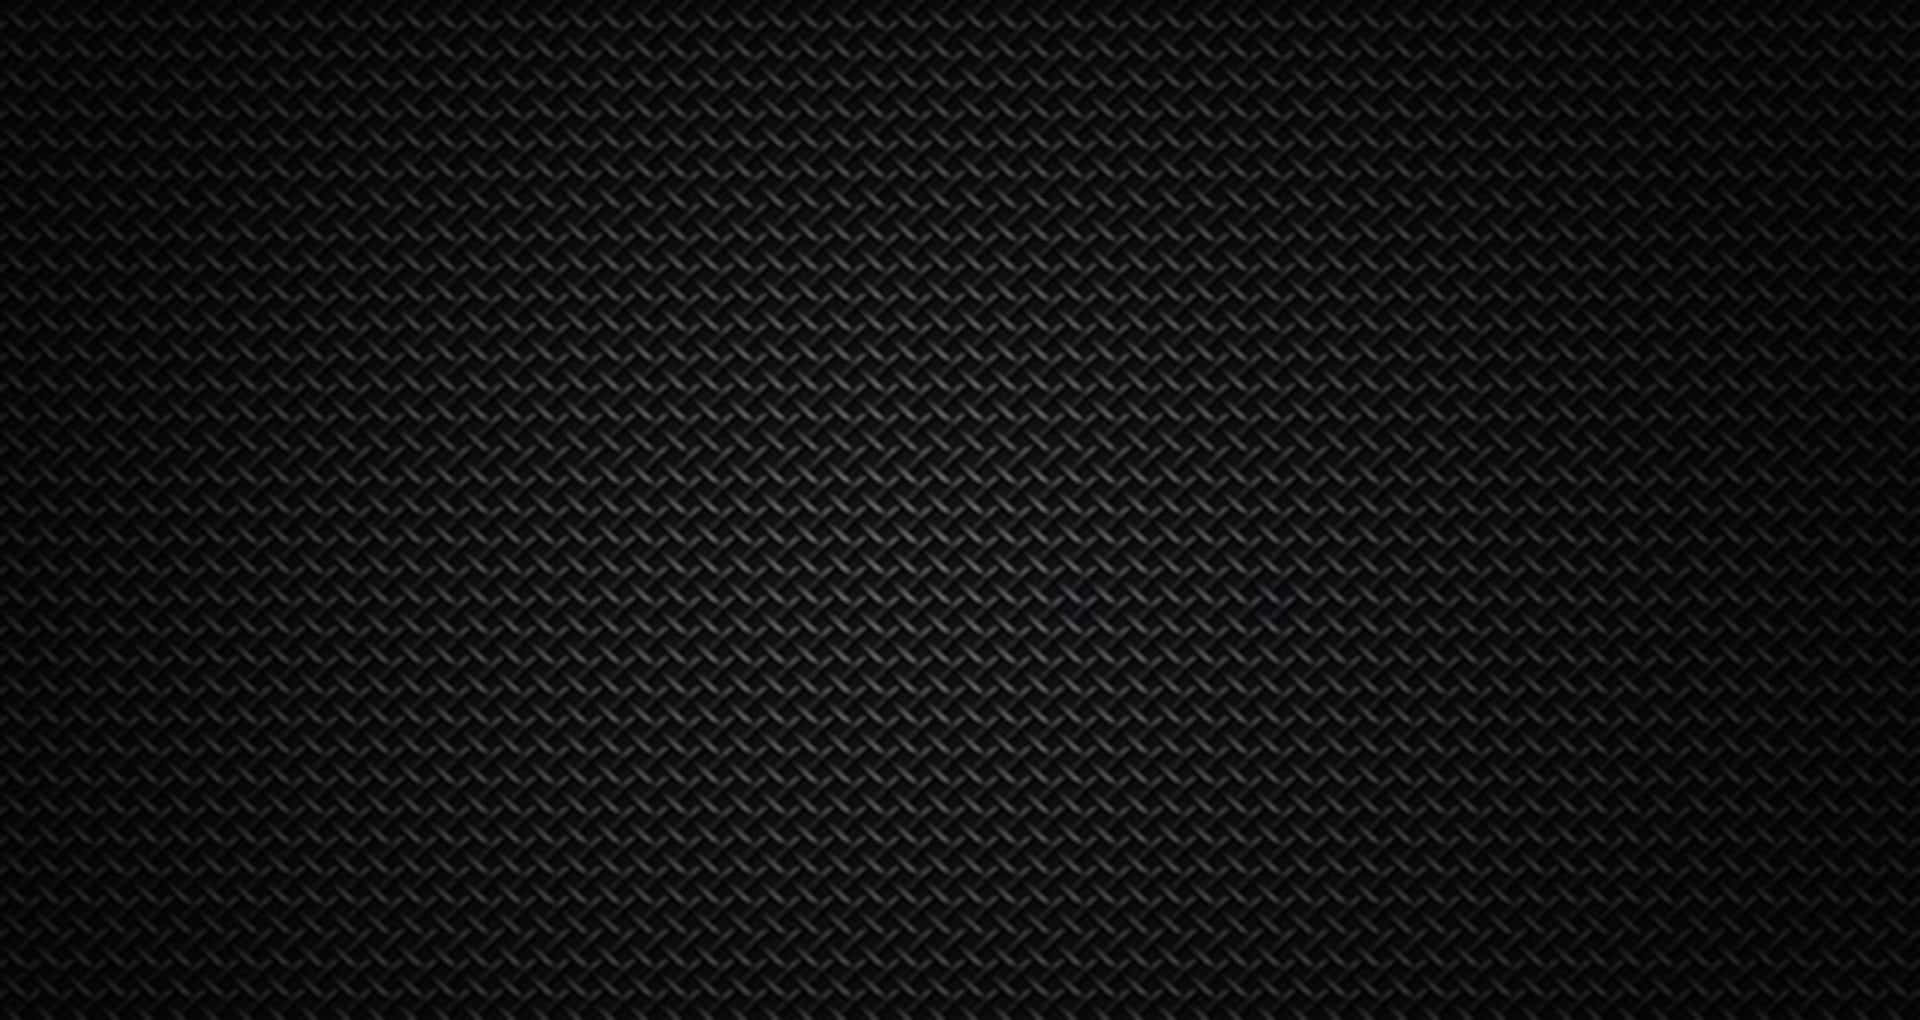 The Impossible Gloss of Black Carbon Fiber Wallpaper